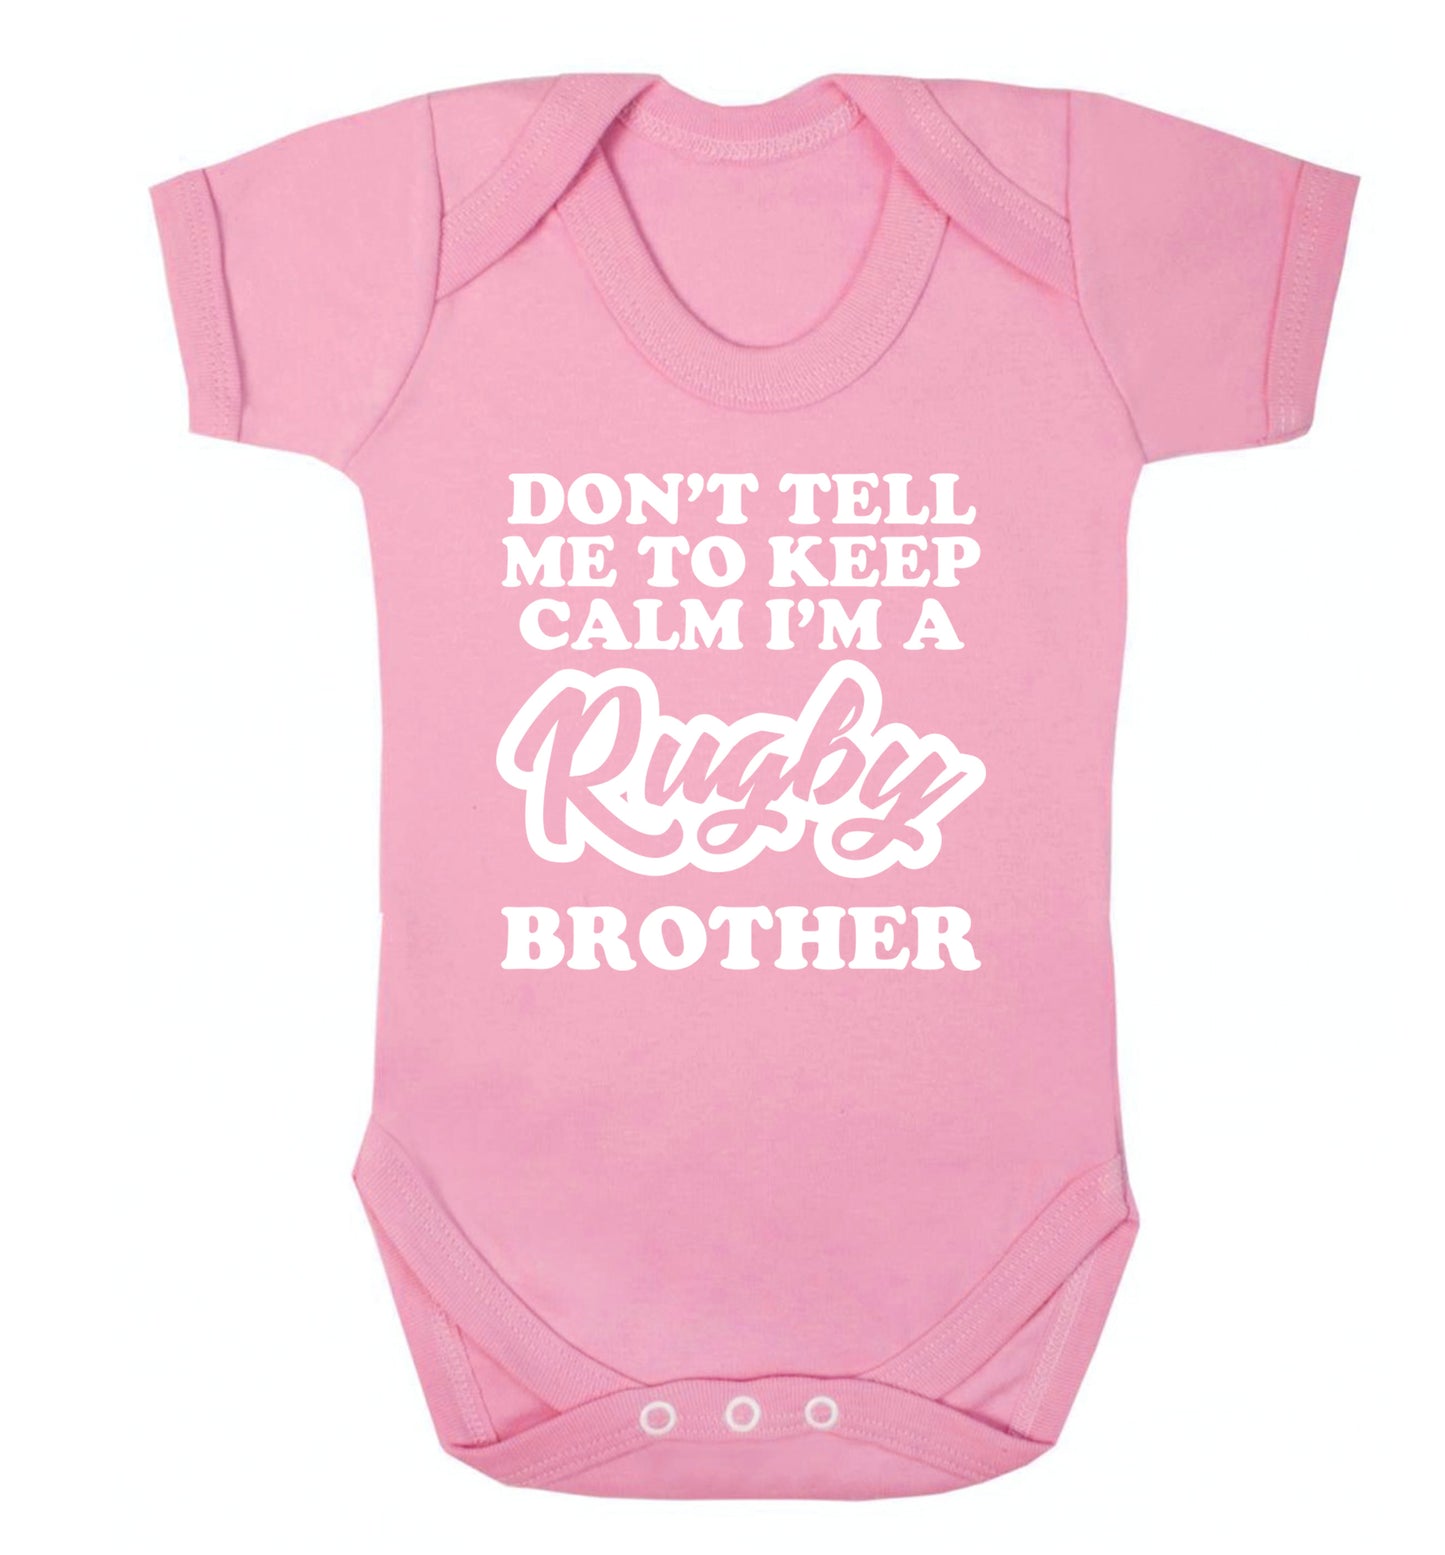 Don't tell me keep calm I'm a rugby brother Baby Vest pale pink 18-24 months